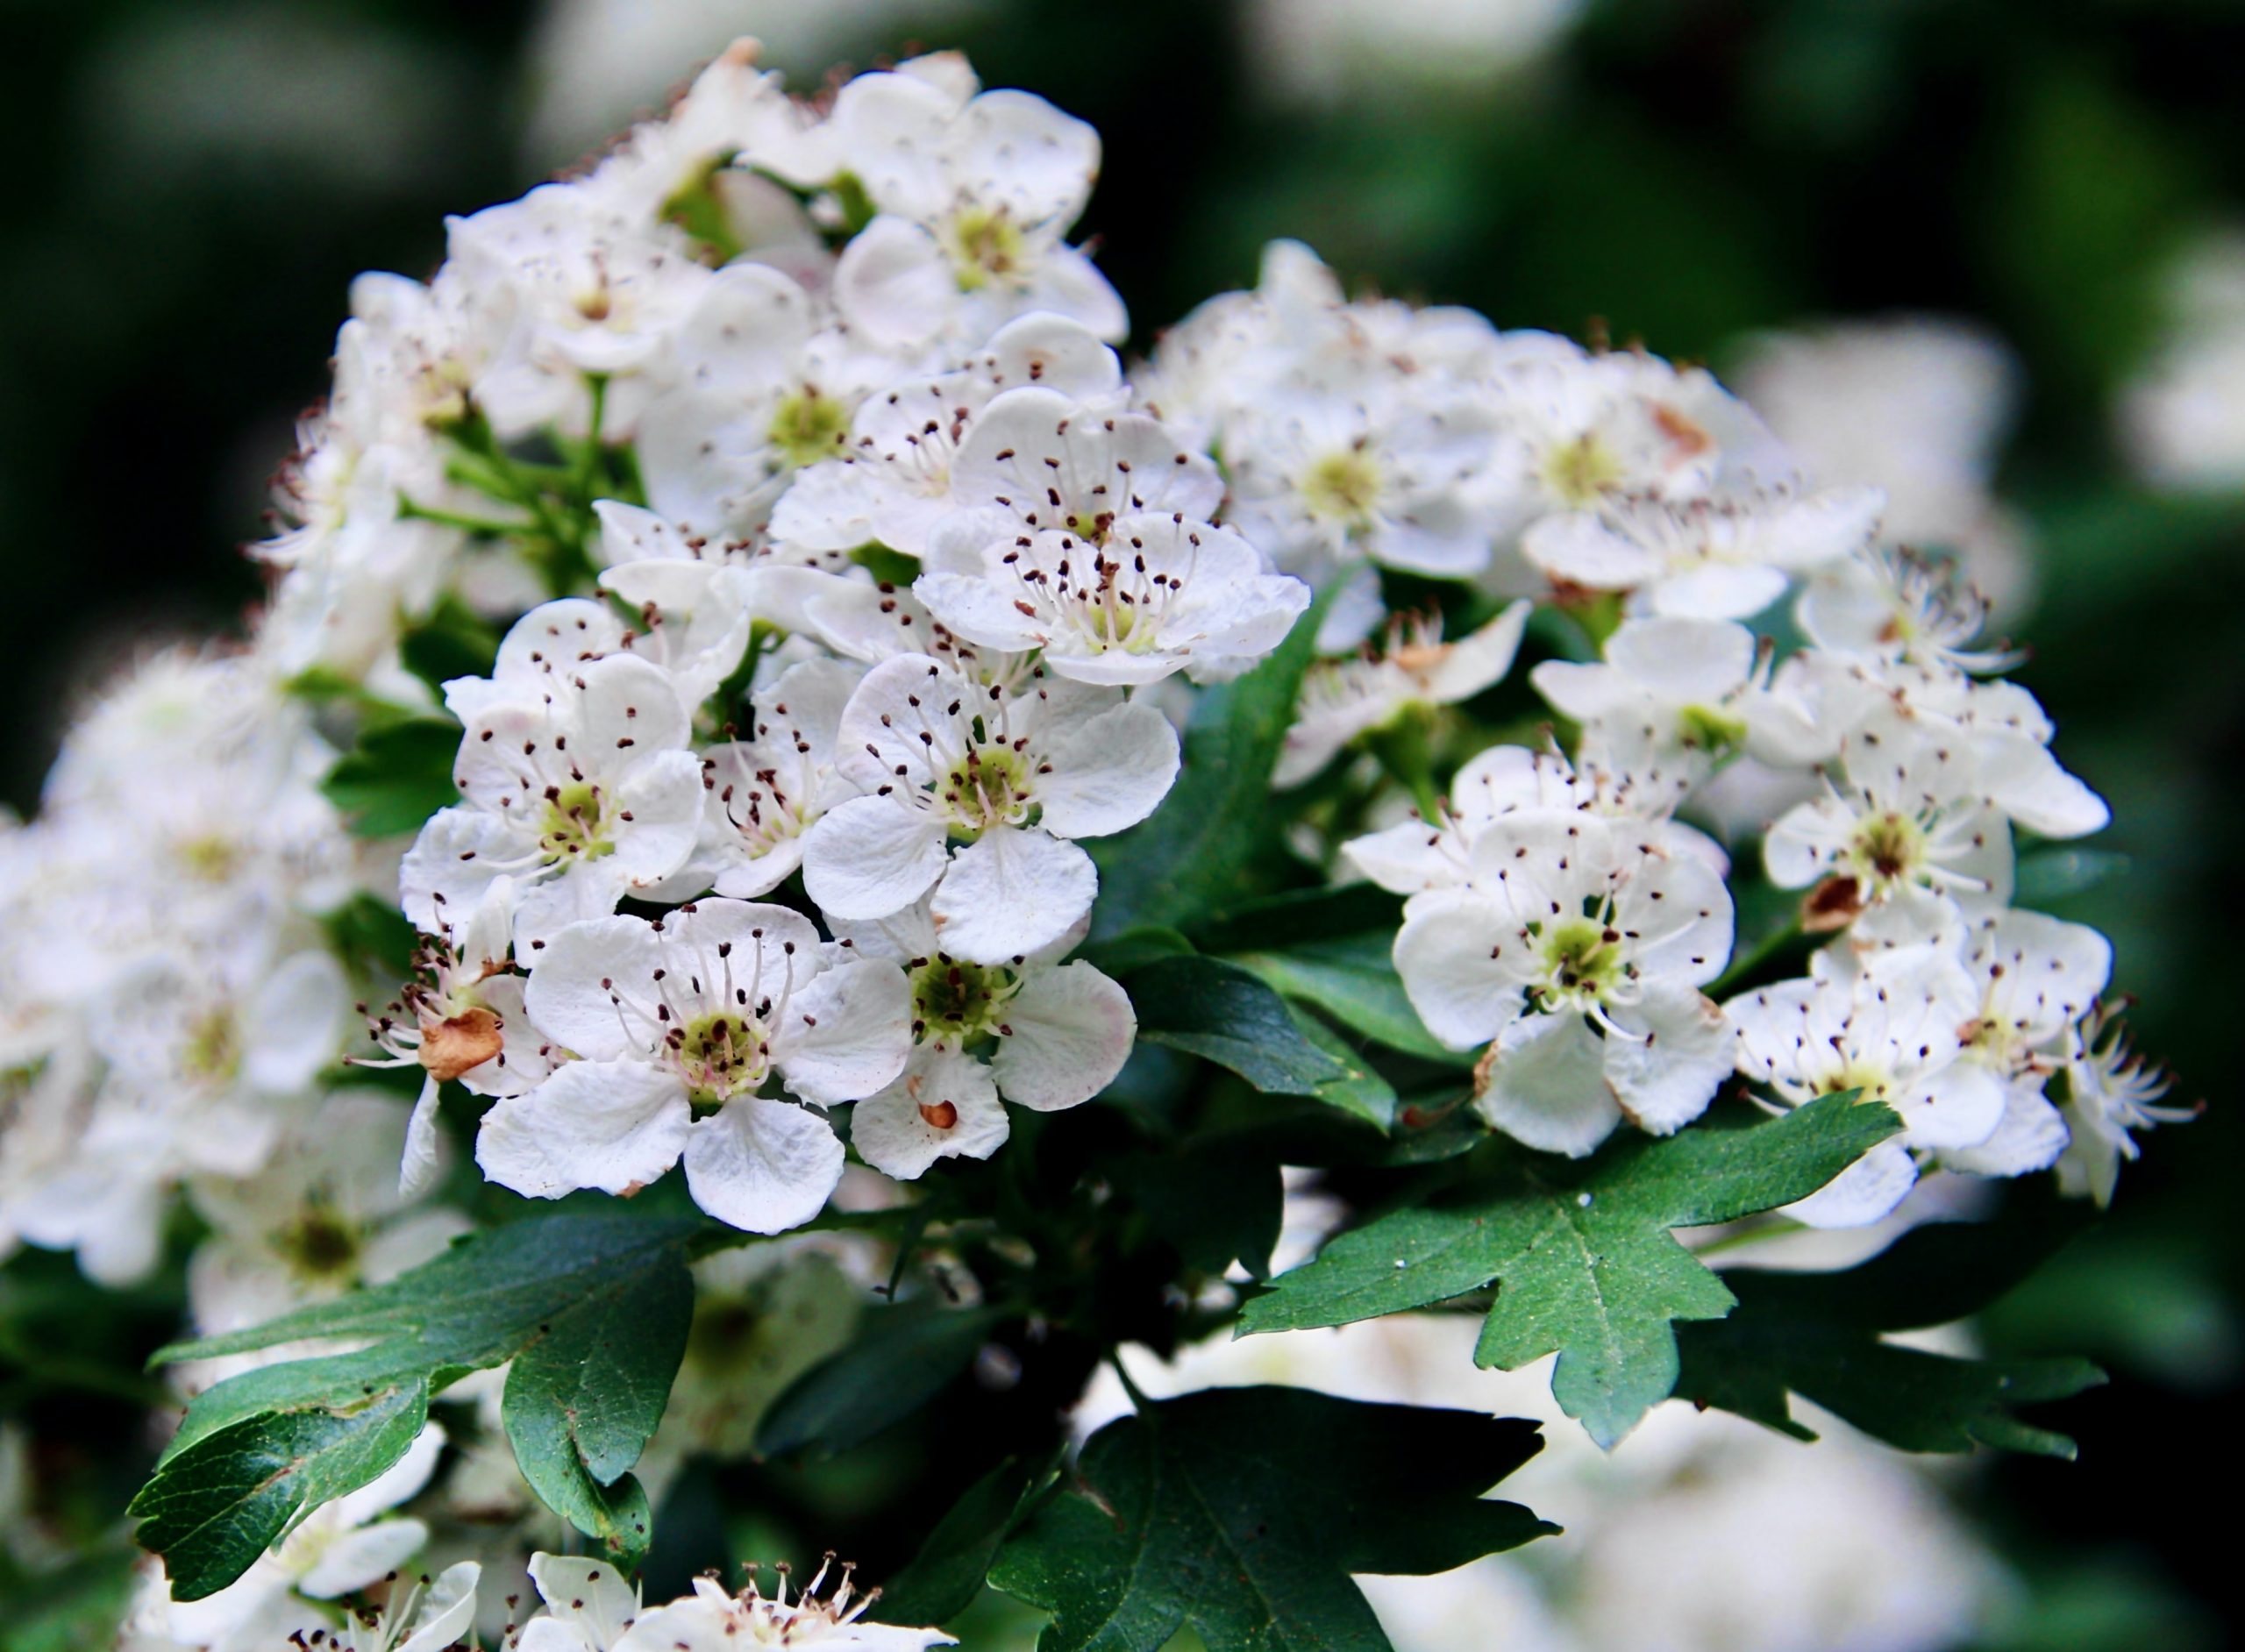  Photo by Timo C. Dinger on Unsplash
photo of hawthorn flowers
  